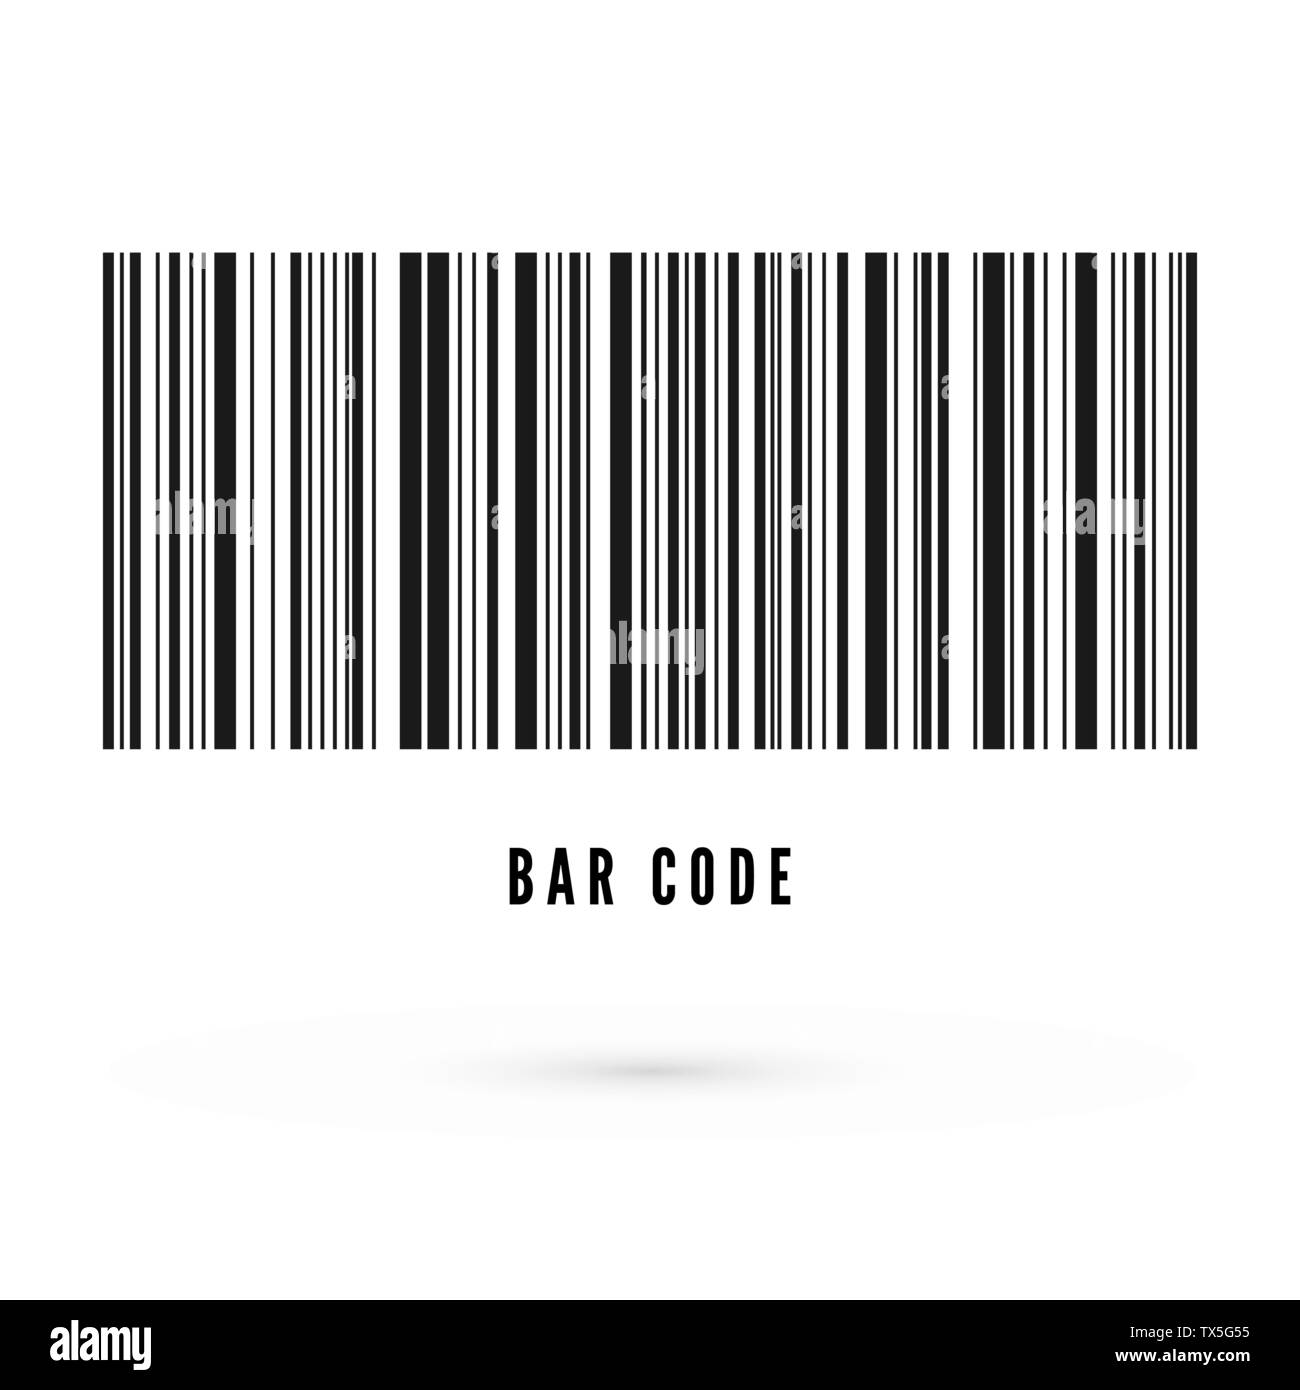 Unique bar code template. Information about product. Vector illustration isolated on white background Stock Vector